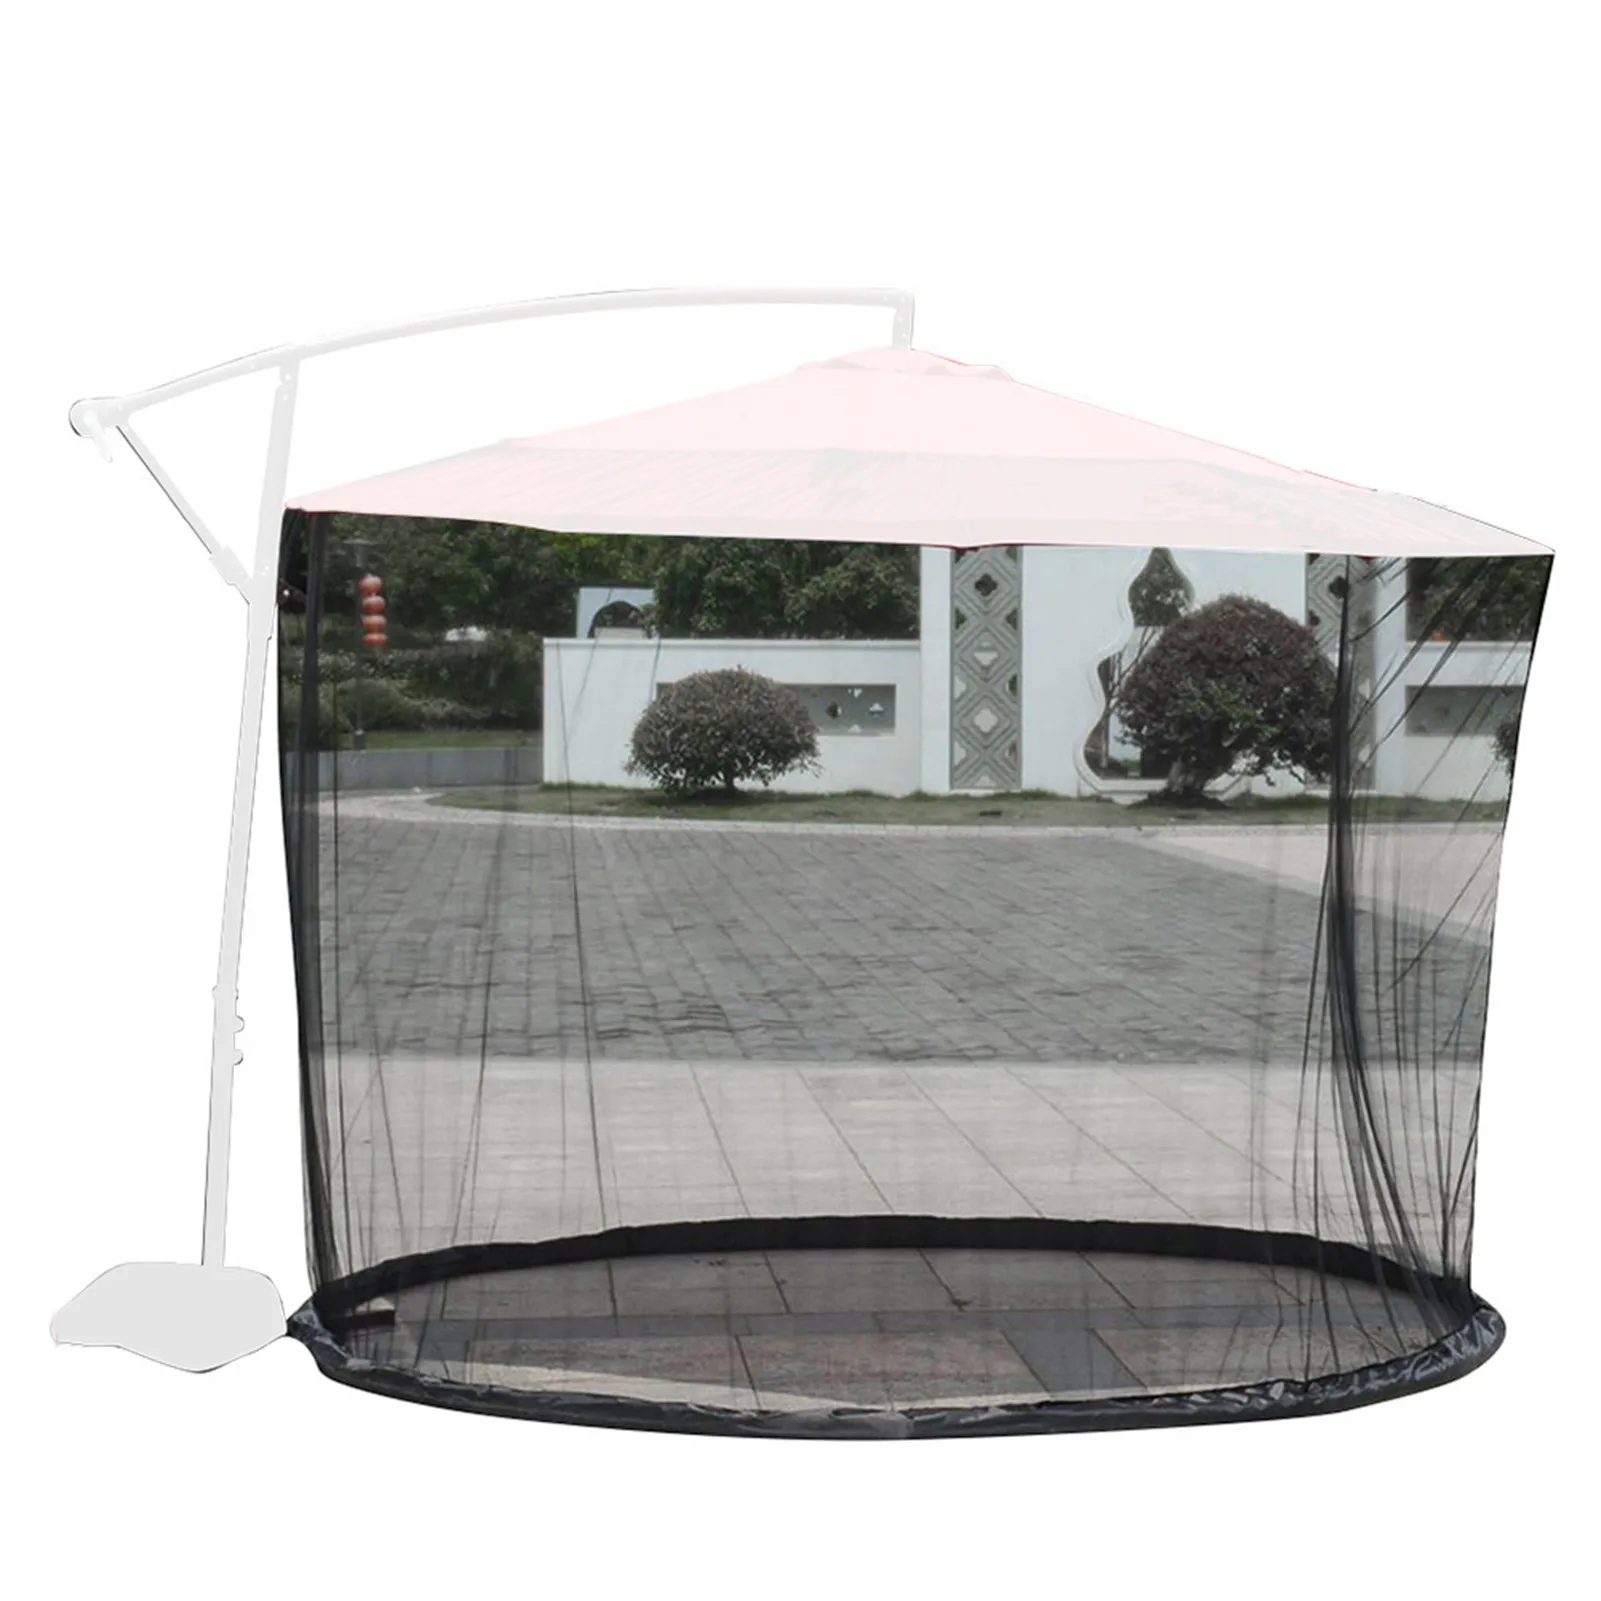 

Patio Umbrella Mosquito Net Screen Garden Canopy Deck Furniture Anti Insect Mosquito Zipper Mesh Cover For Outdoor Awning